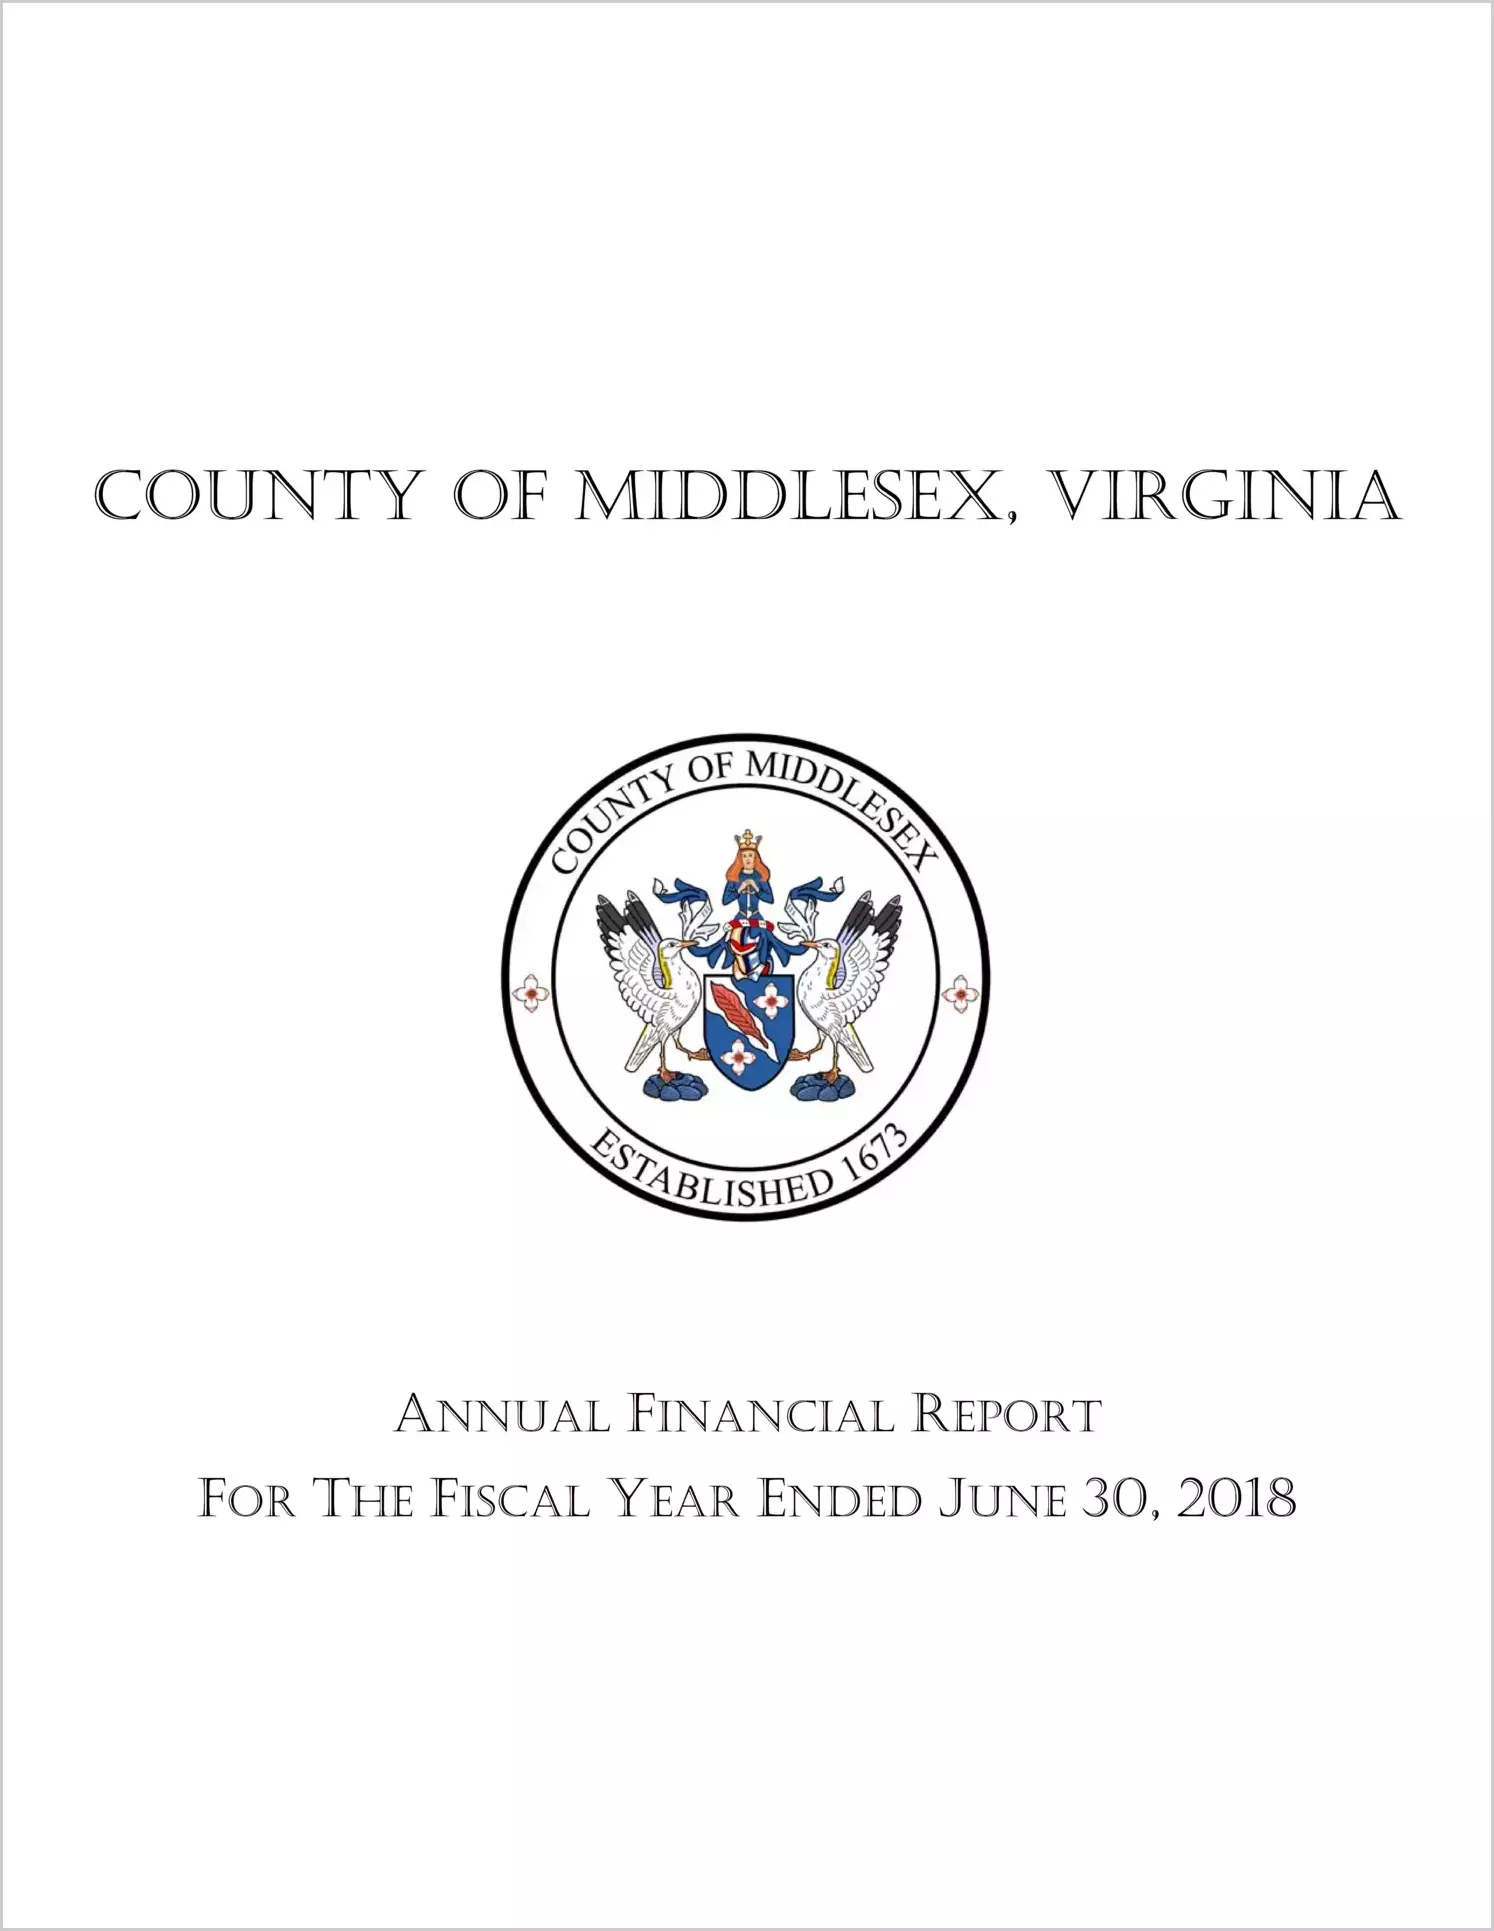 2018 Annual Financial Report for County of Middlesex